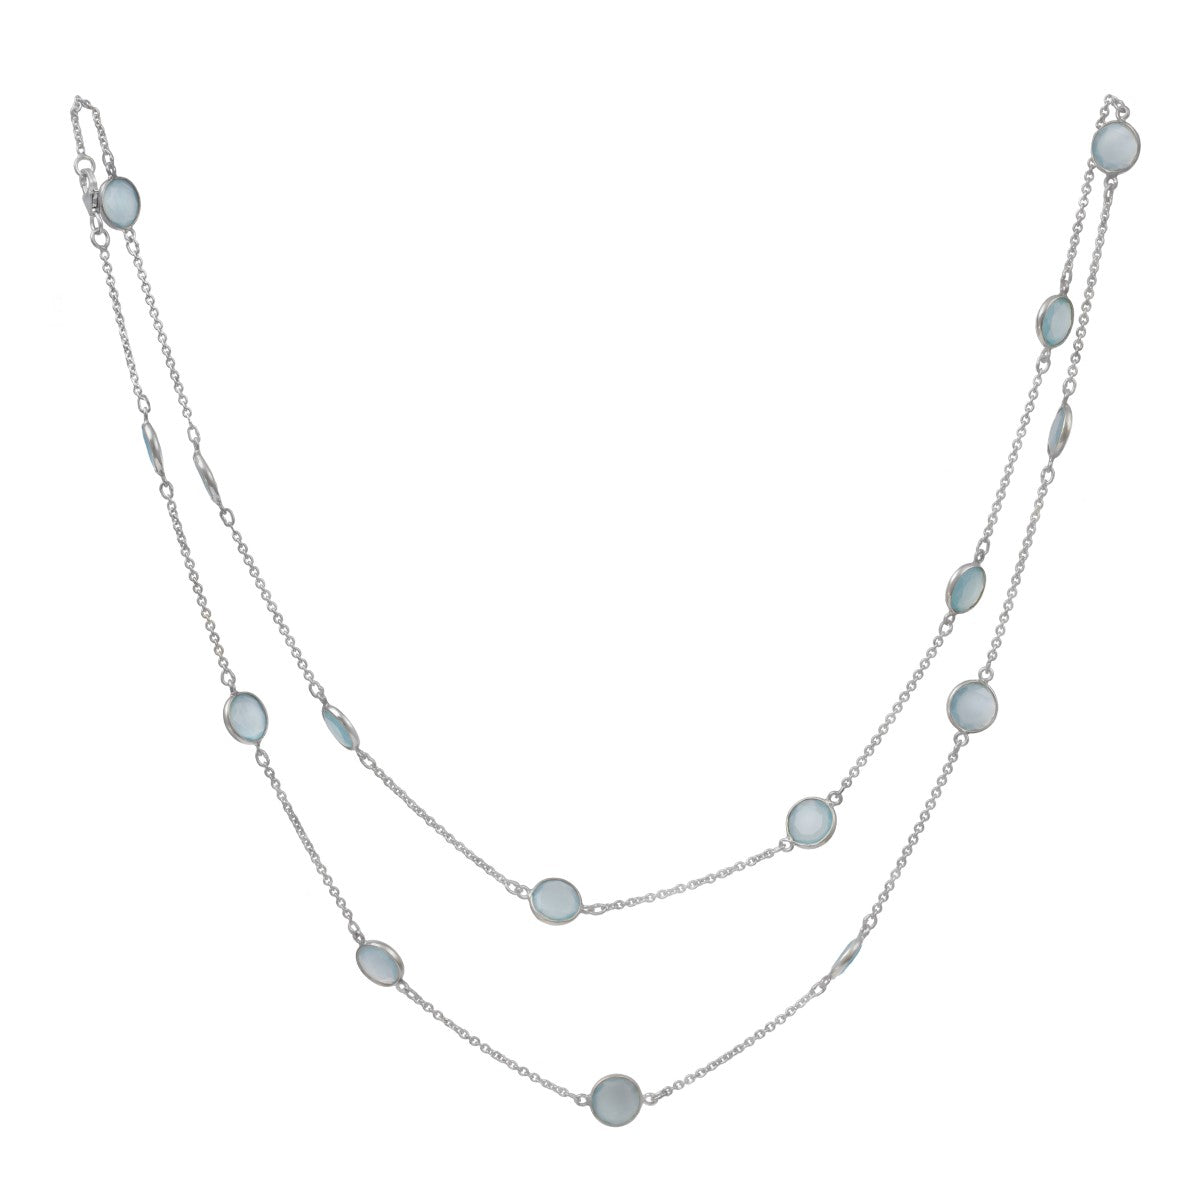 Aqua Chalcedony Gemstone Necklace in Sterling Silver